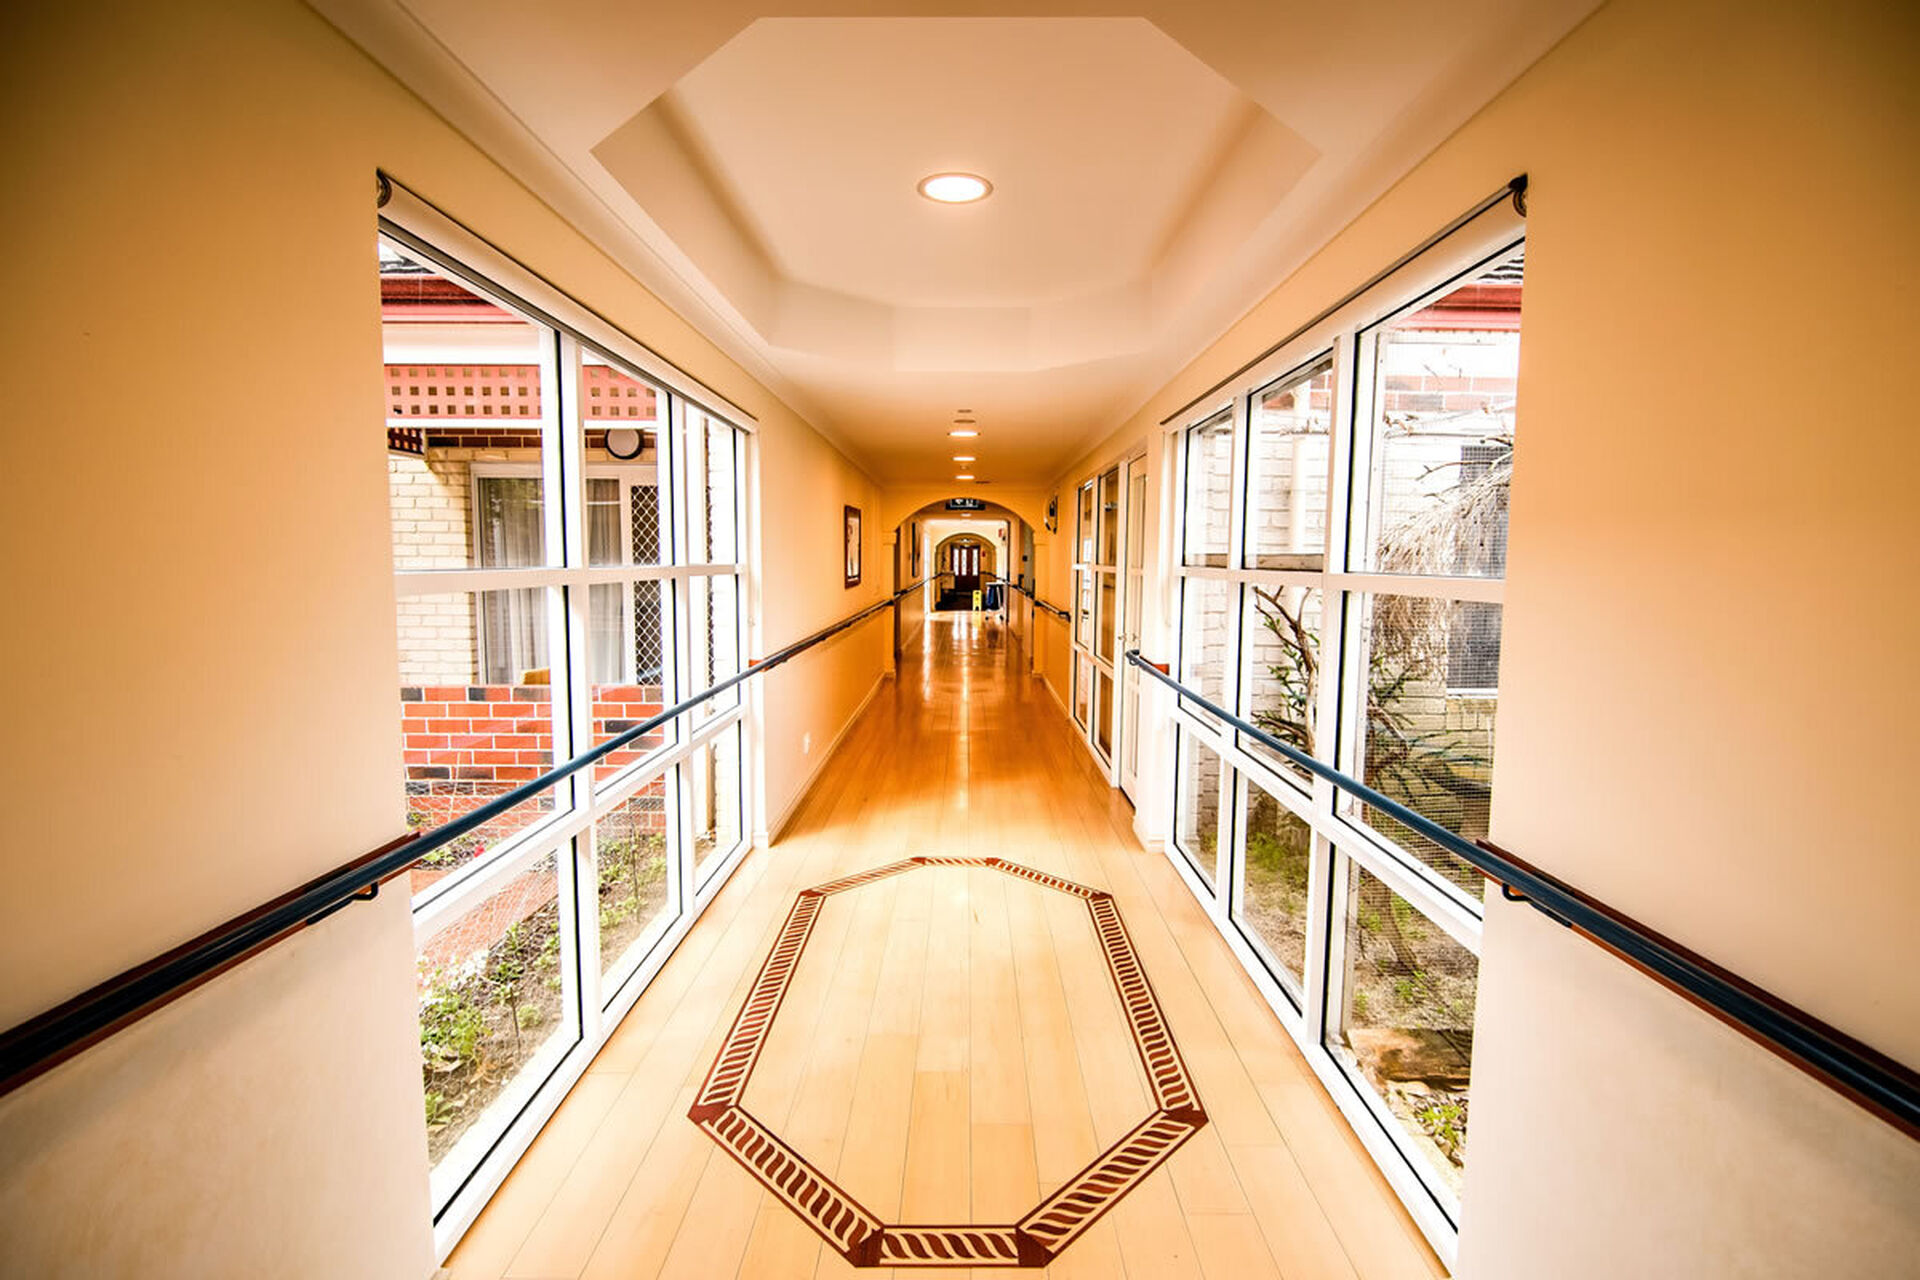 access to courtyards at baptistcare bethel aged care home in albany wa